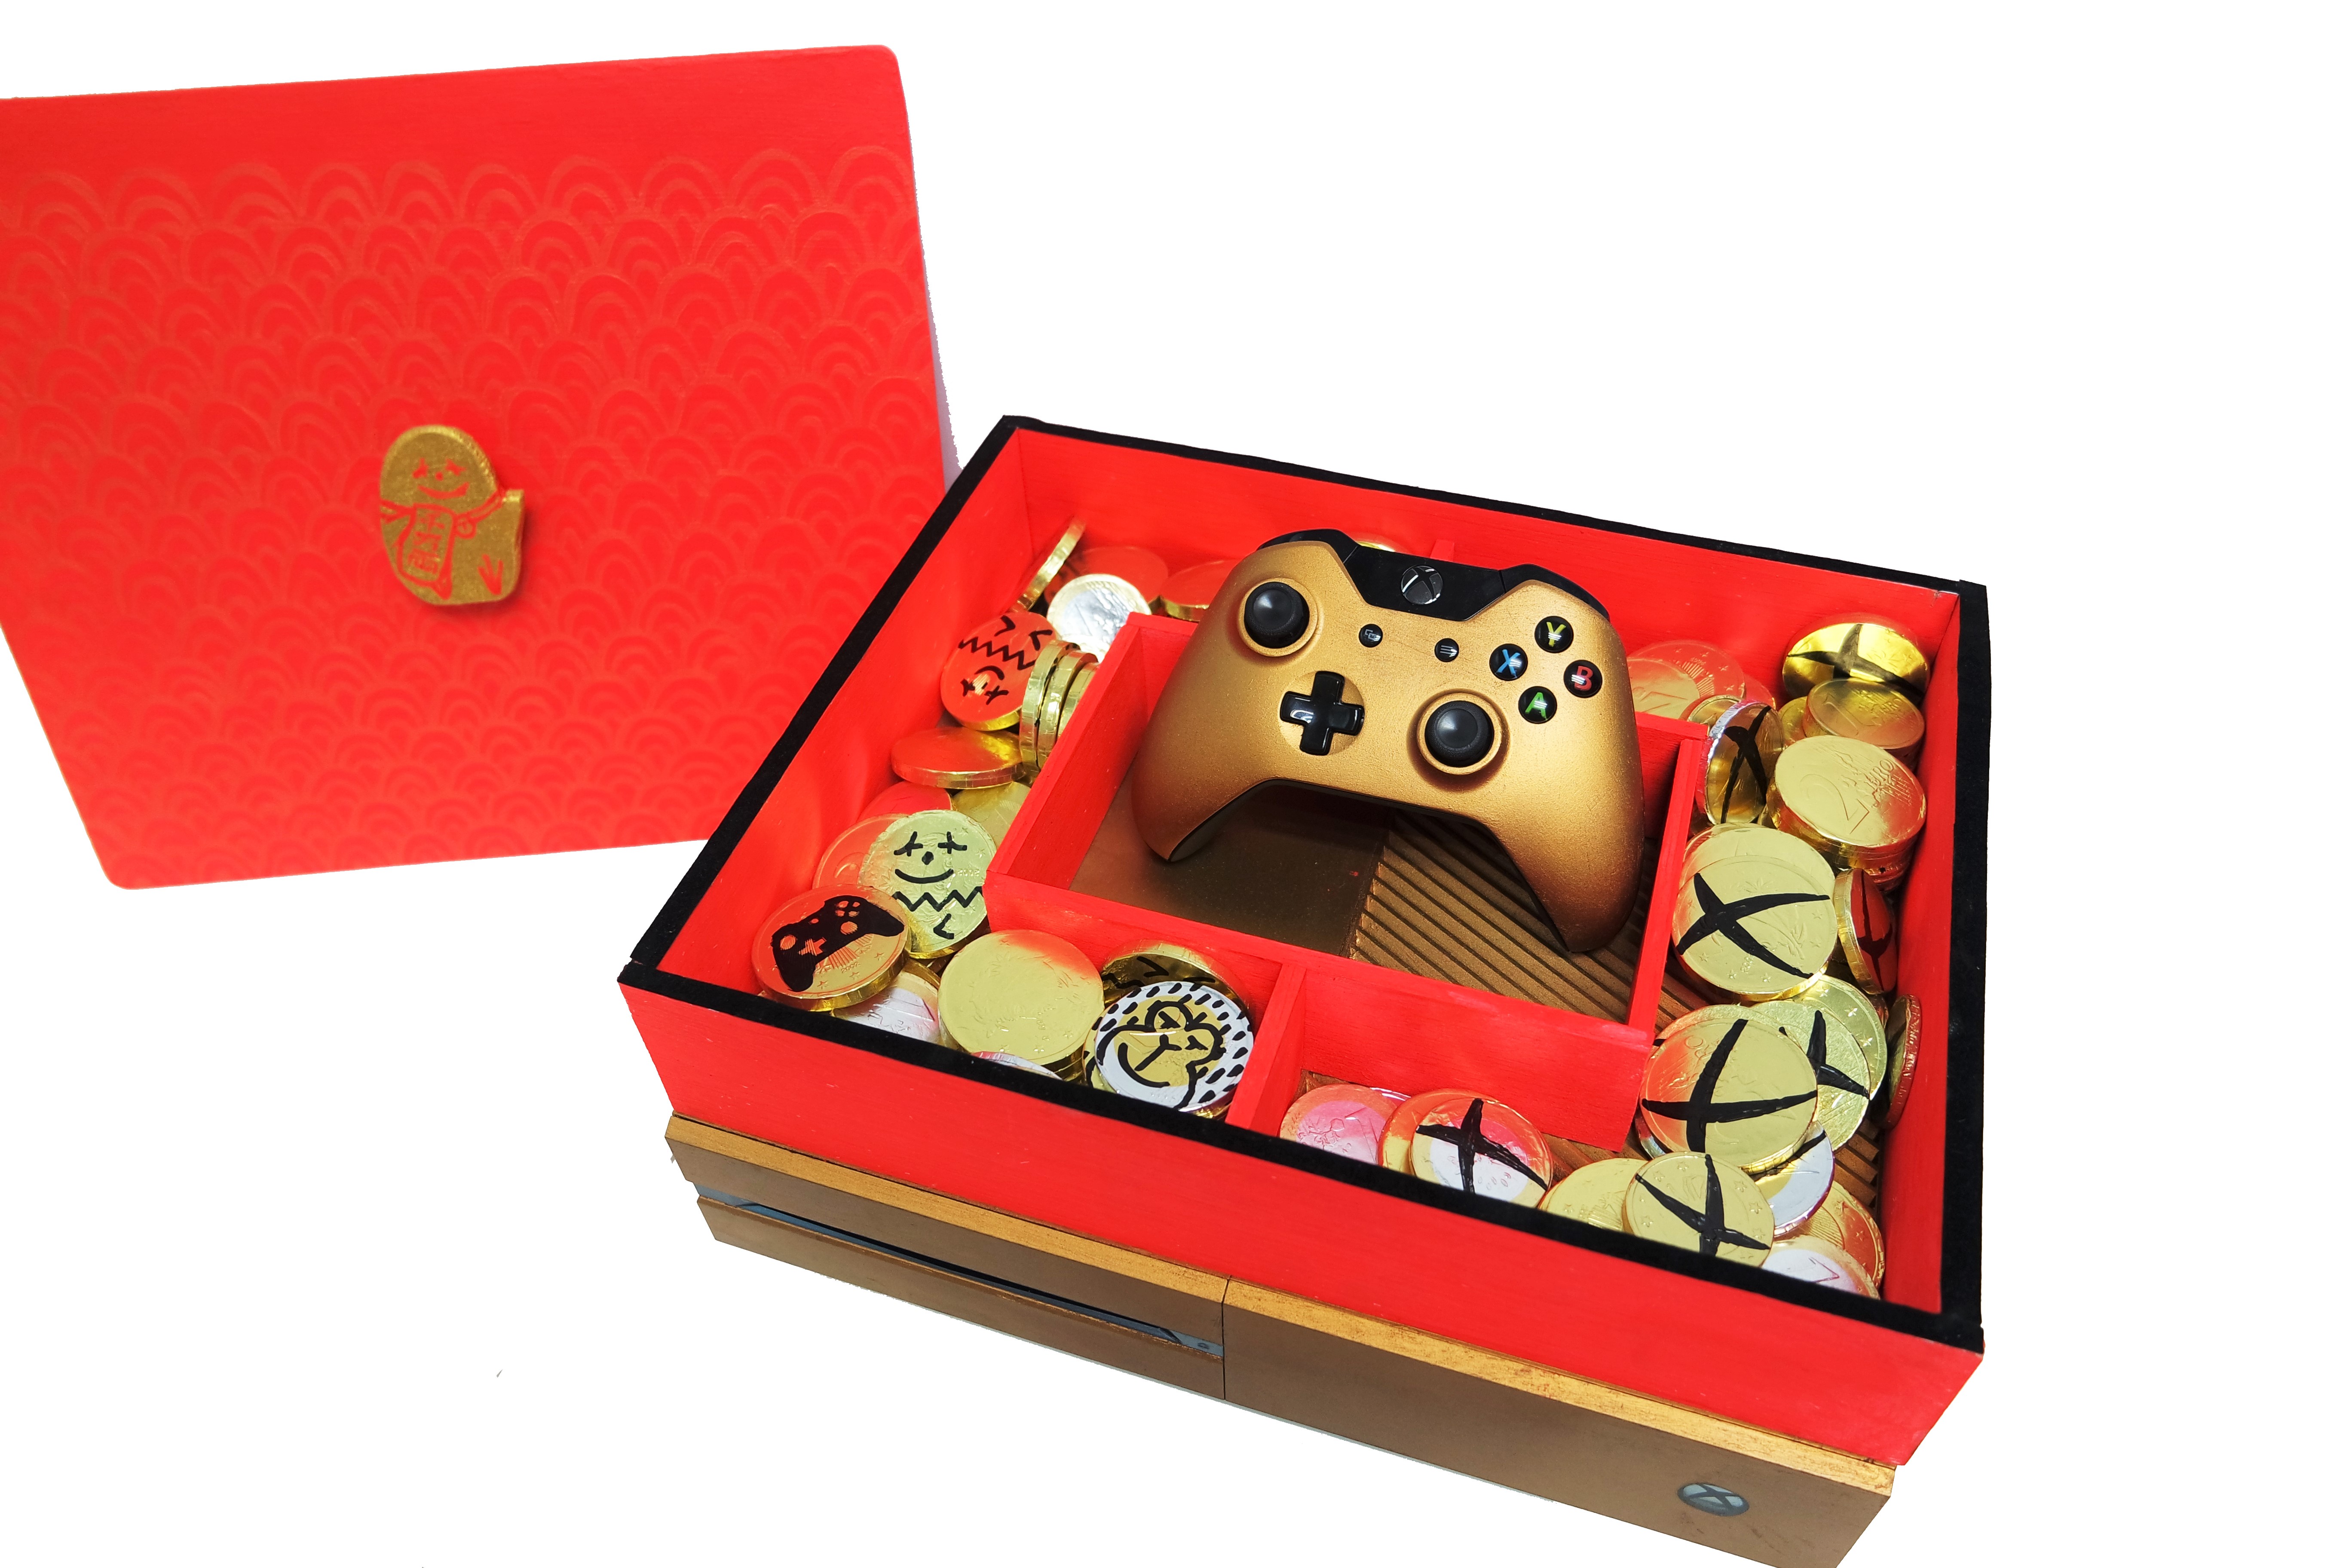 Check out these one-of-a-kind Xbox One designs created to 